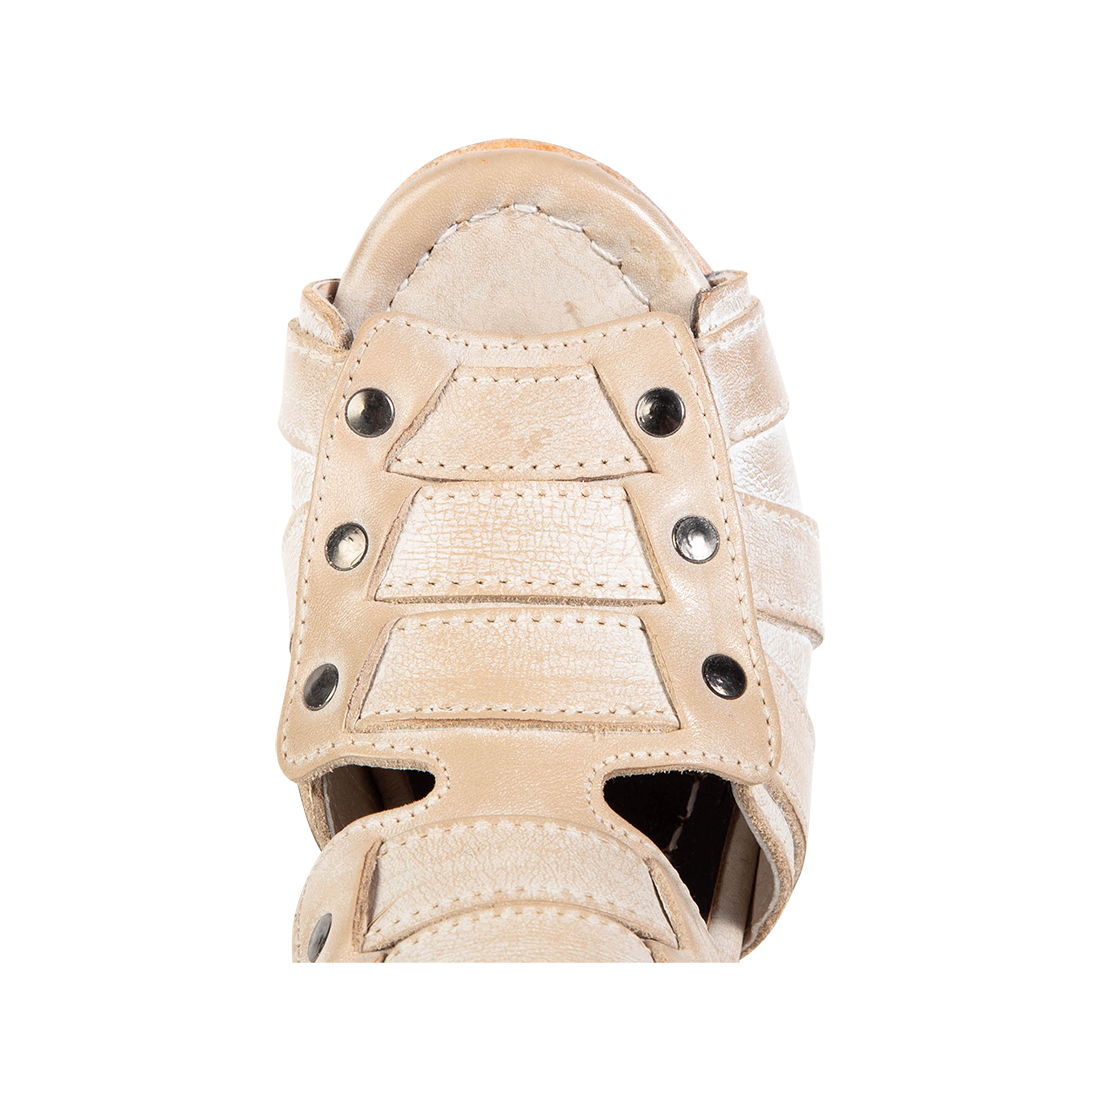 Top view showing leather and stud detailing FREEBIRD women's Zane beige heeled sandal